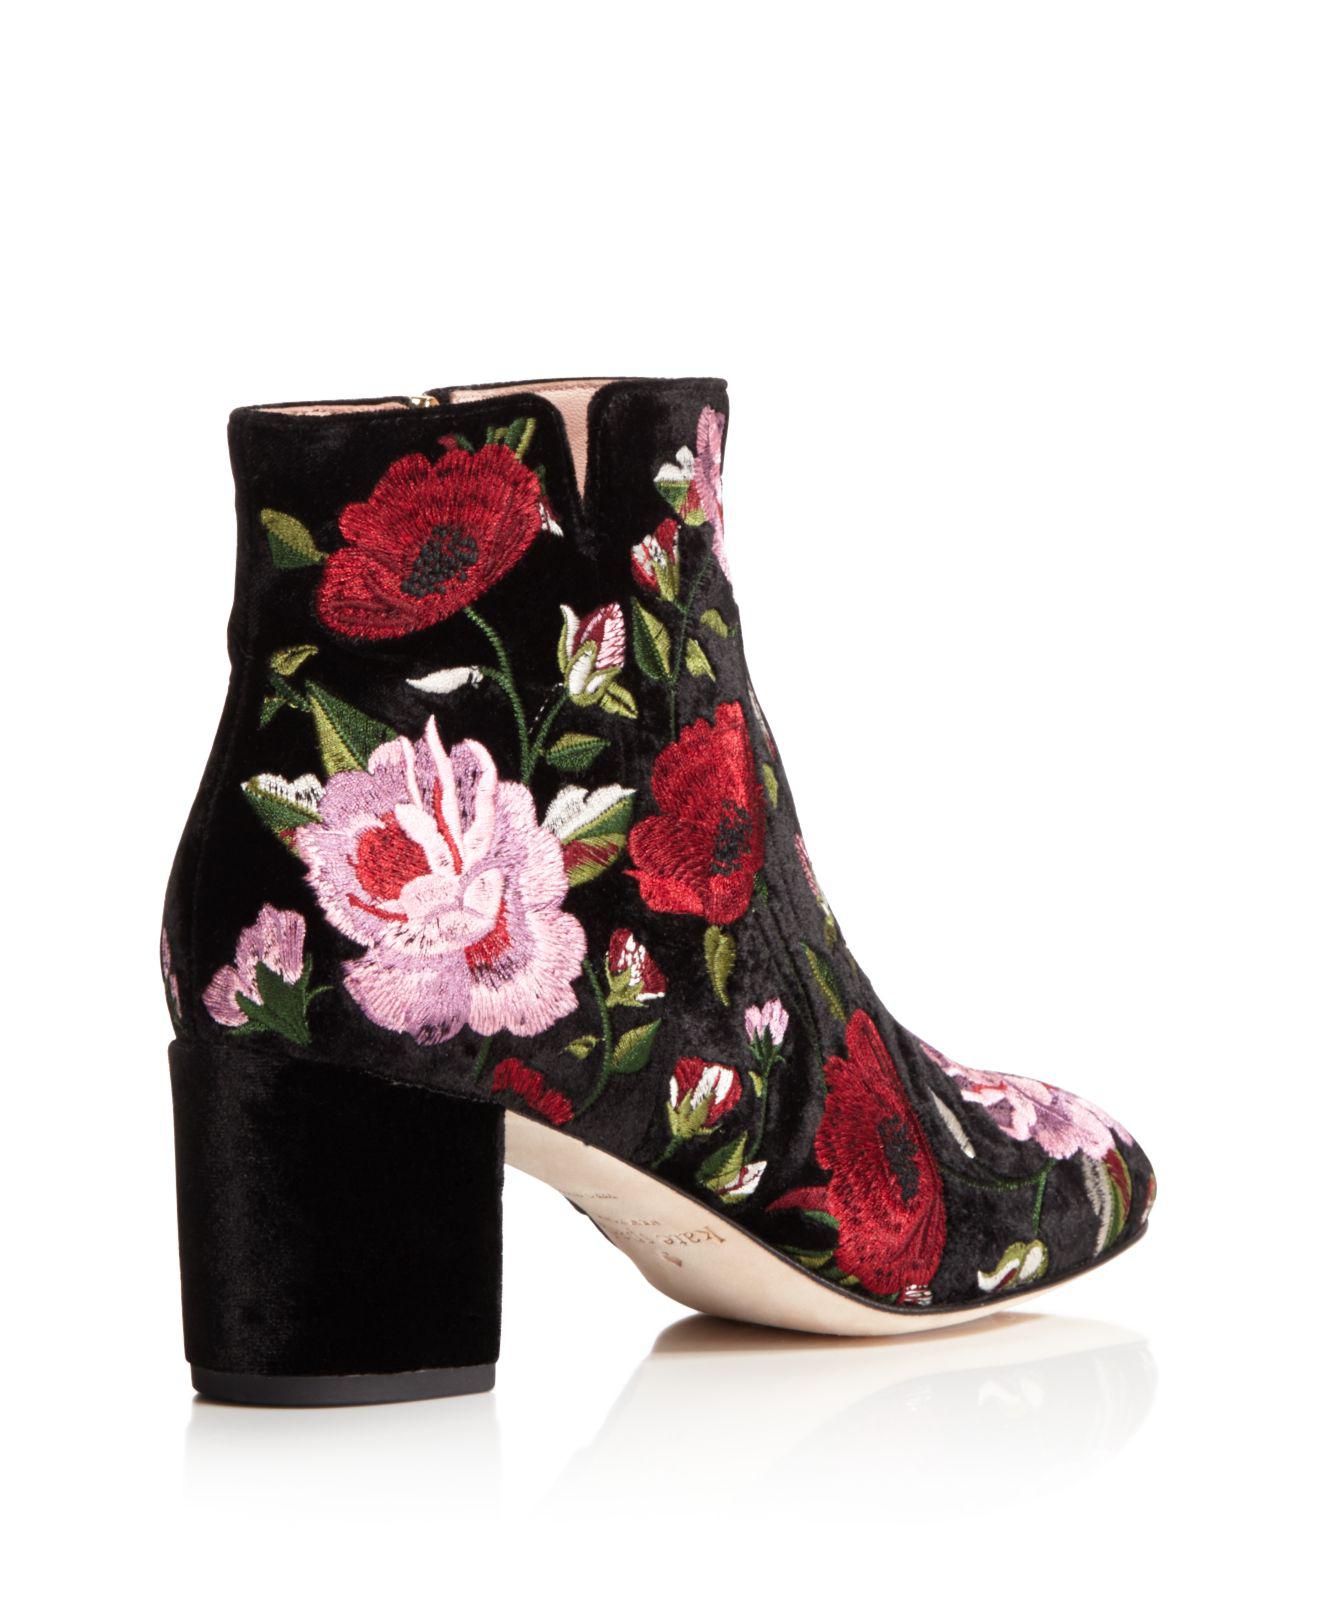 Lyst - Kate Spade Lucine Floral Embroidered Velvet Booties